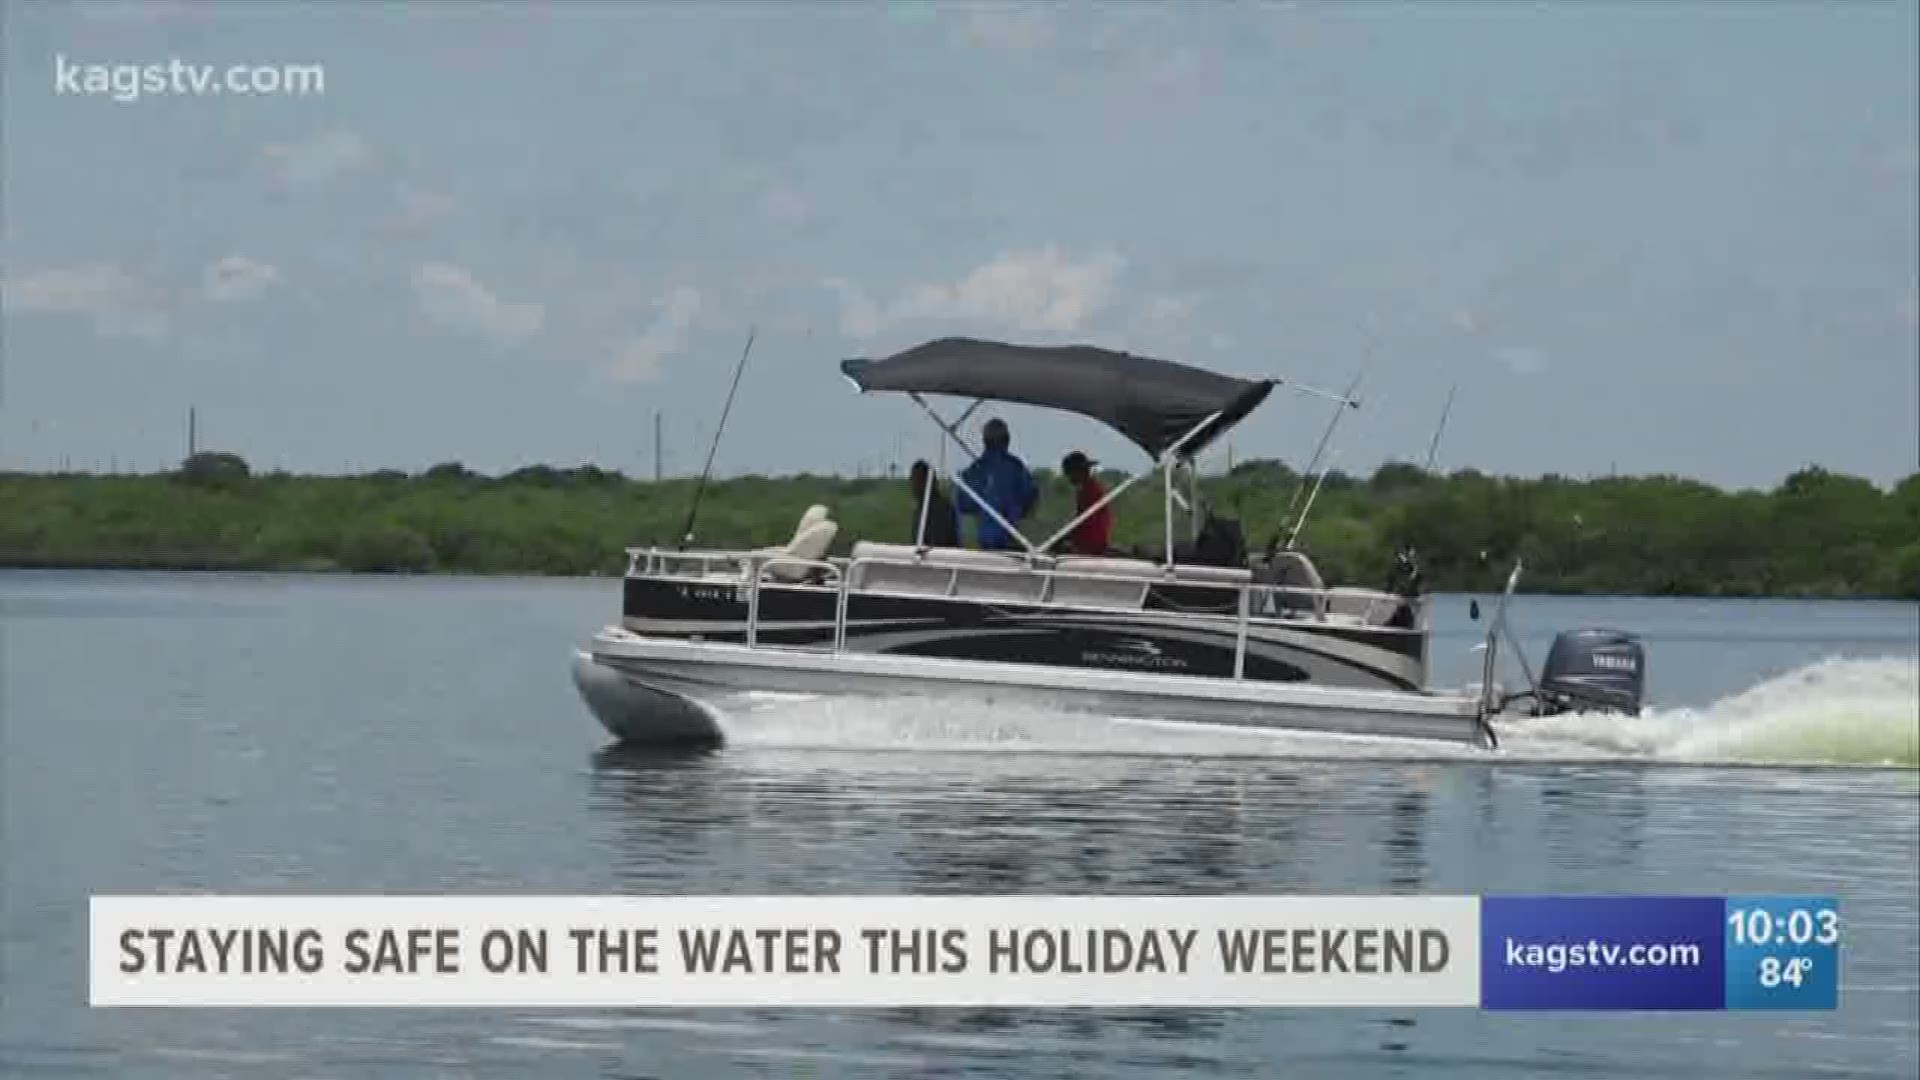 Summer is upon us and this weekend it will kick into full swing. With various activities summer provides, there are some safety concerns too, especially when out on the water. Here is Kerrie Hall with a very helpful tips to remember when out on the water